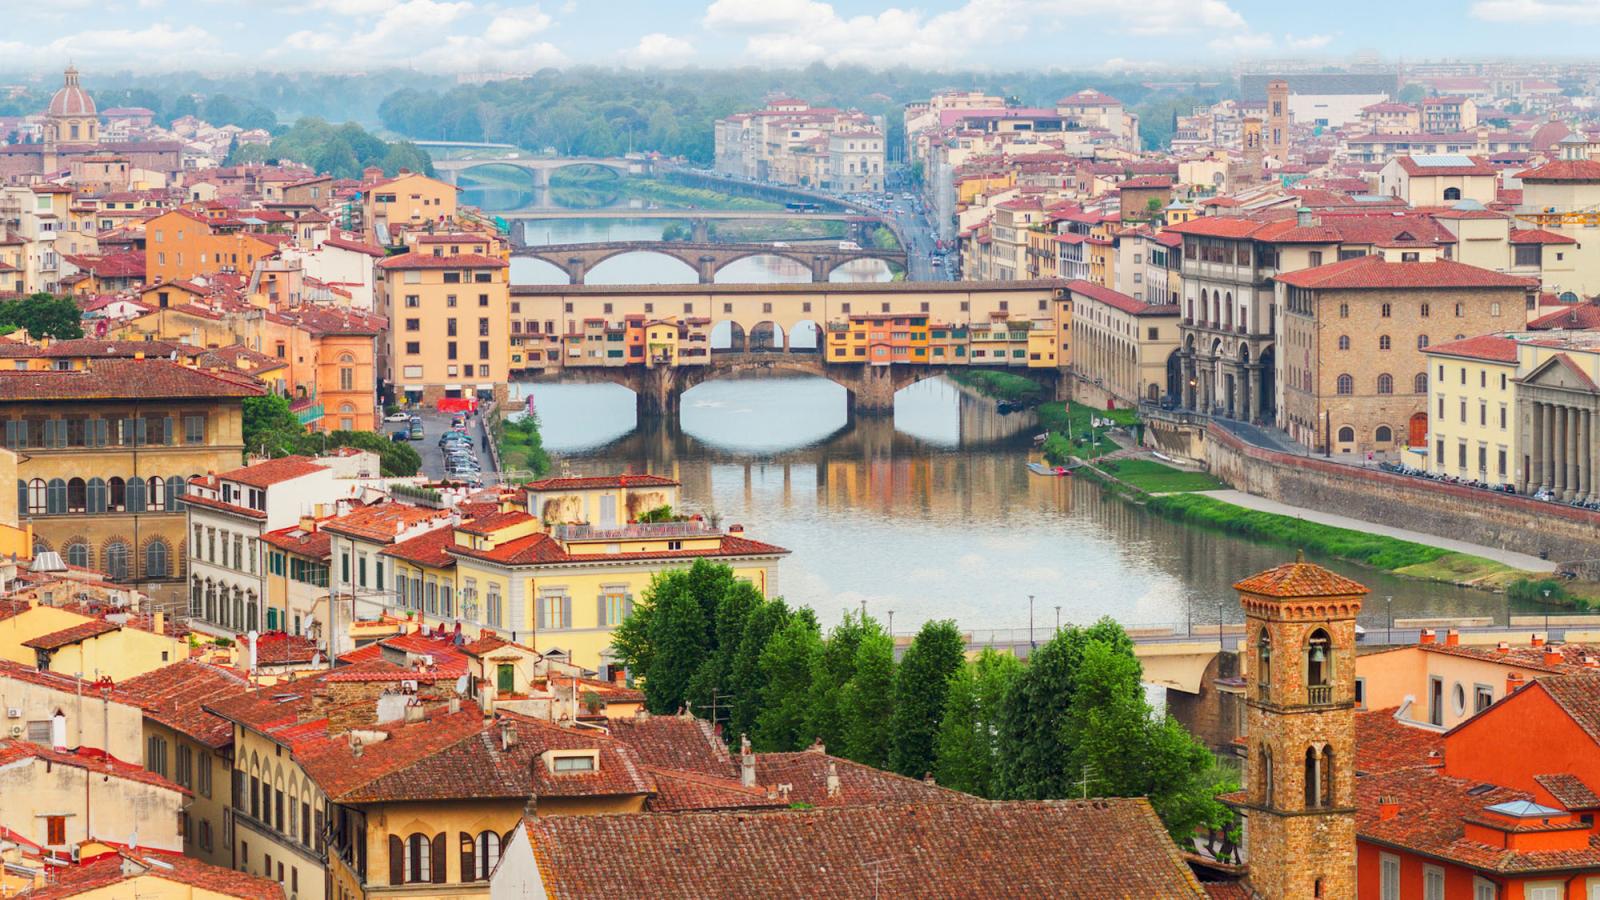 wide aerial view of the city of Florence, Italy